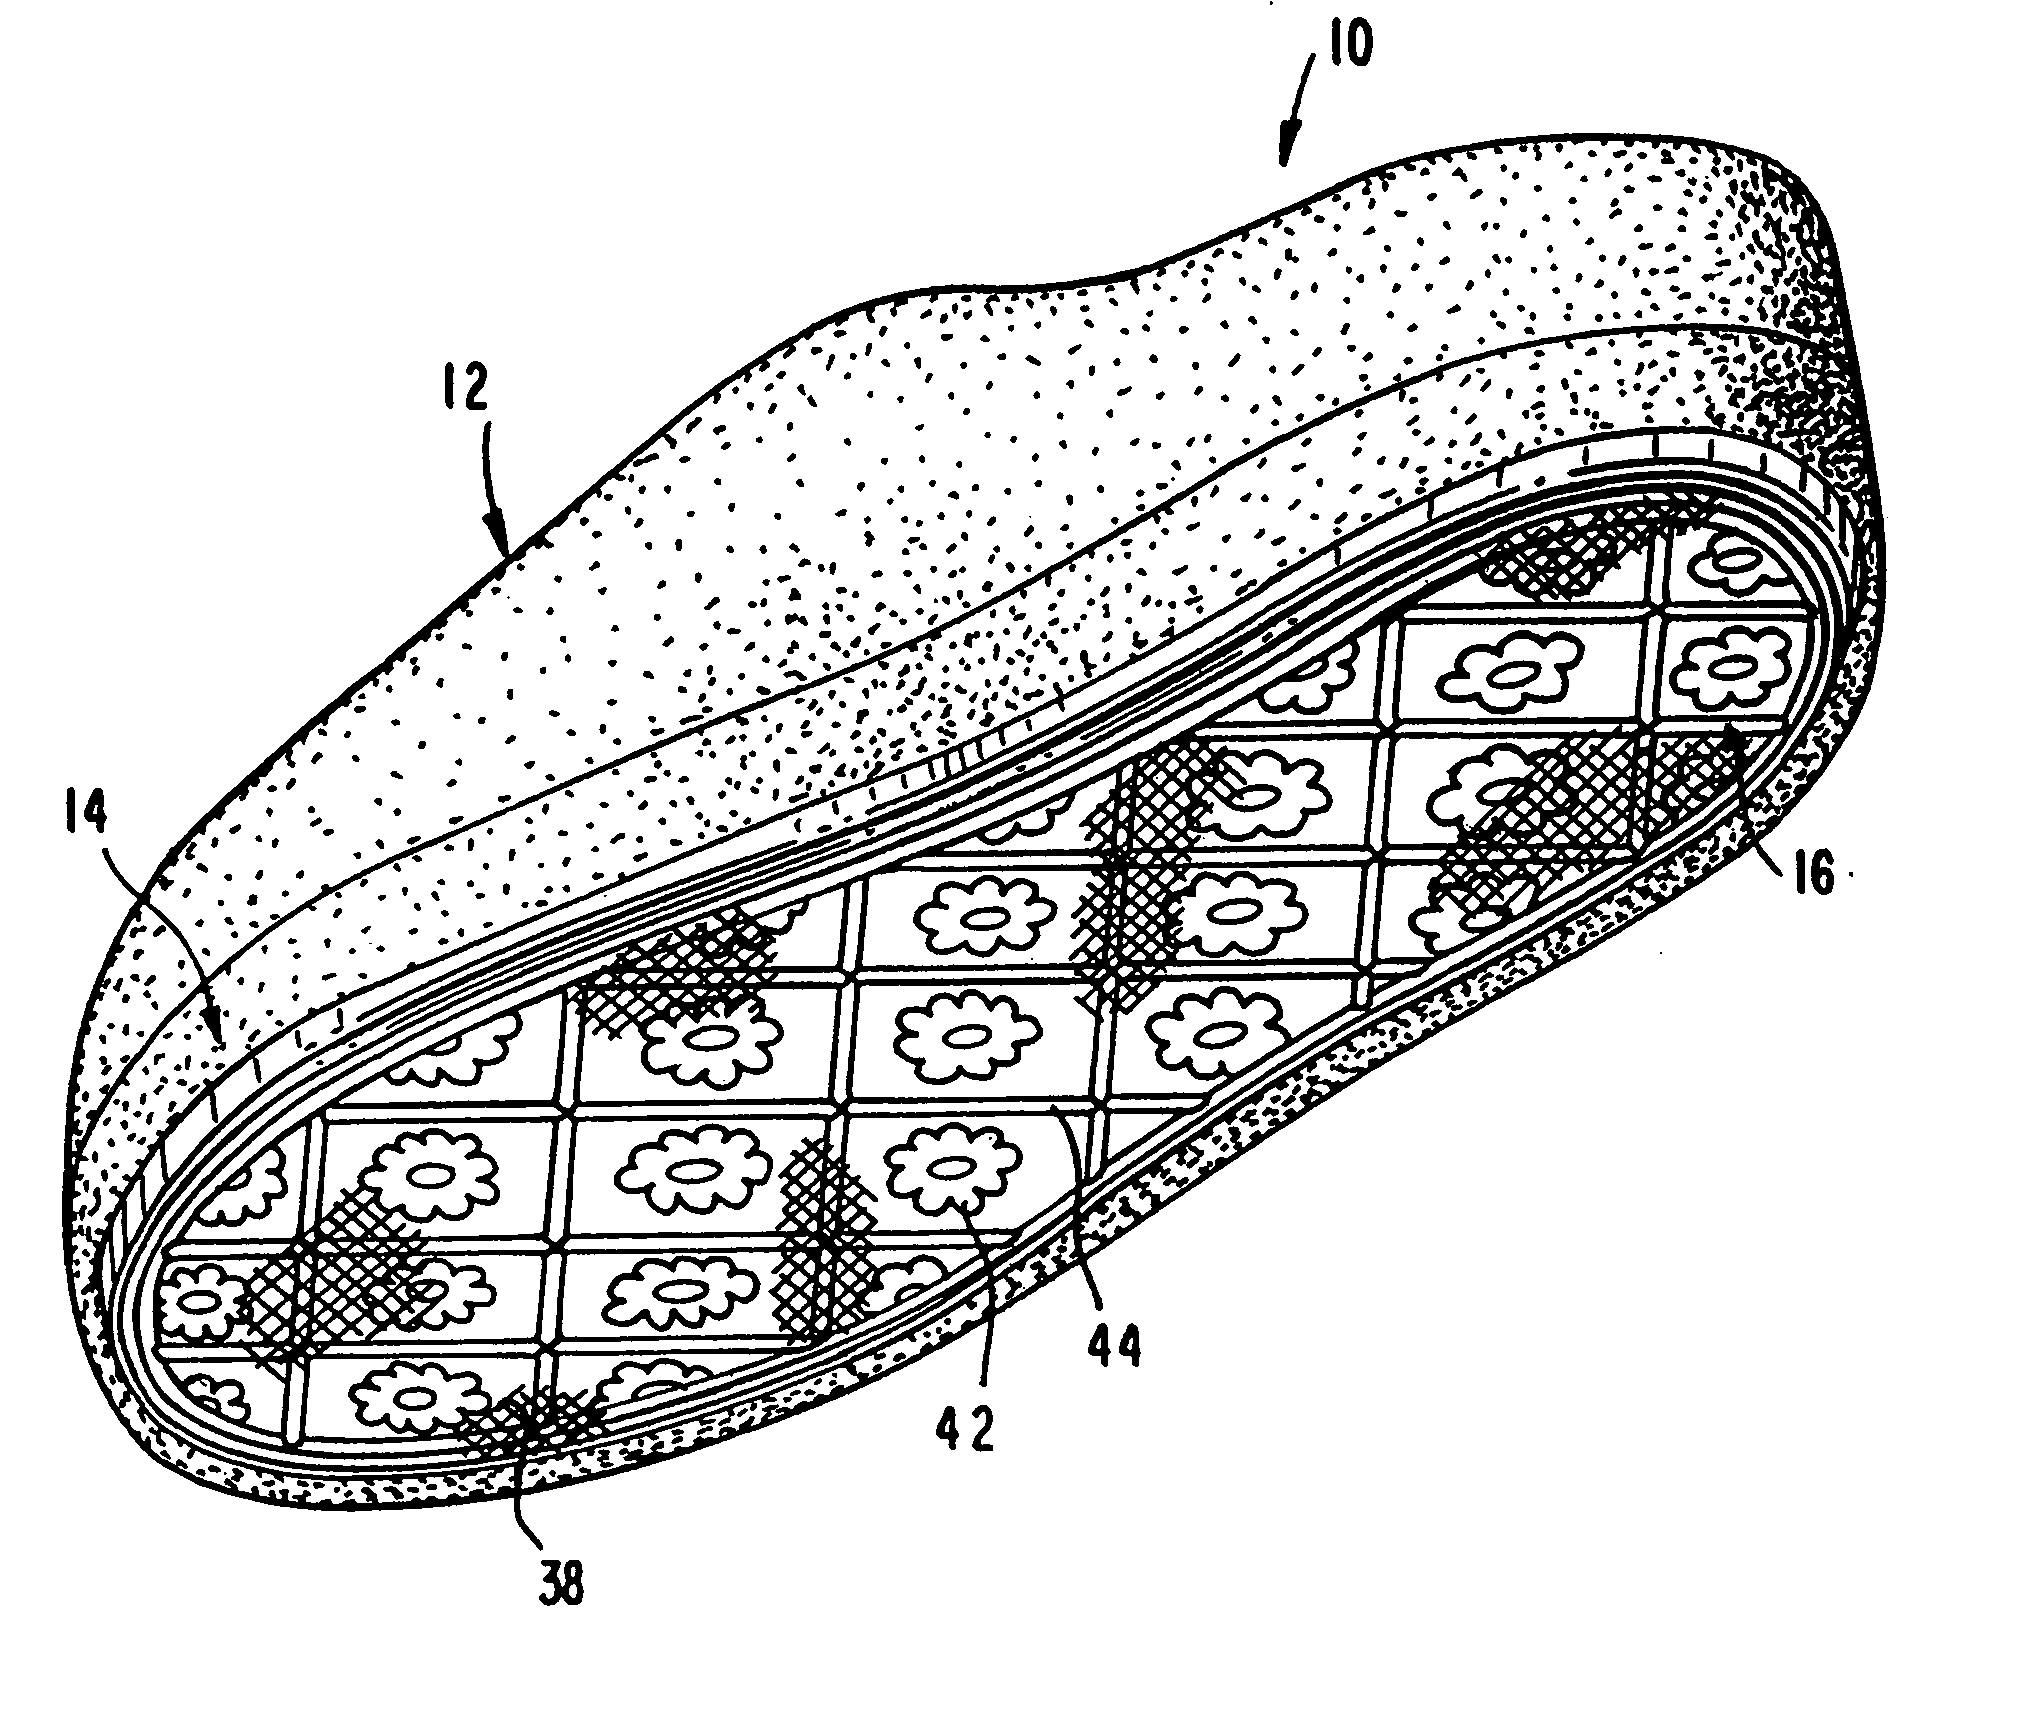 Shoe with slip-resistant, shape-retaining fabric outsole